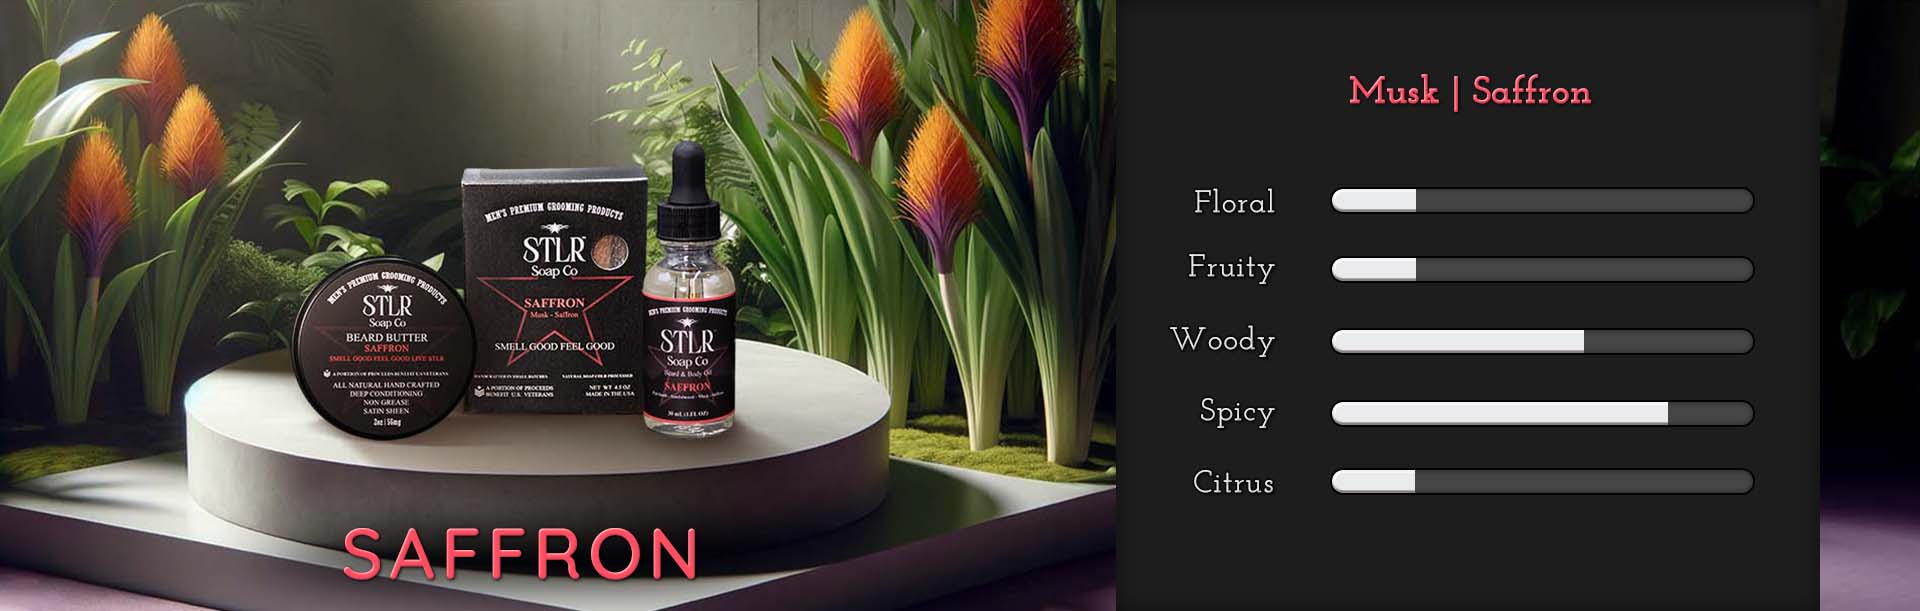 graphic featuring a scale of scent notes for STLR's Saffron Men's Soap